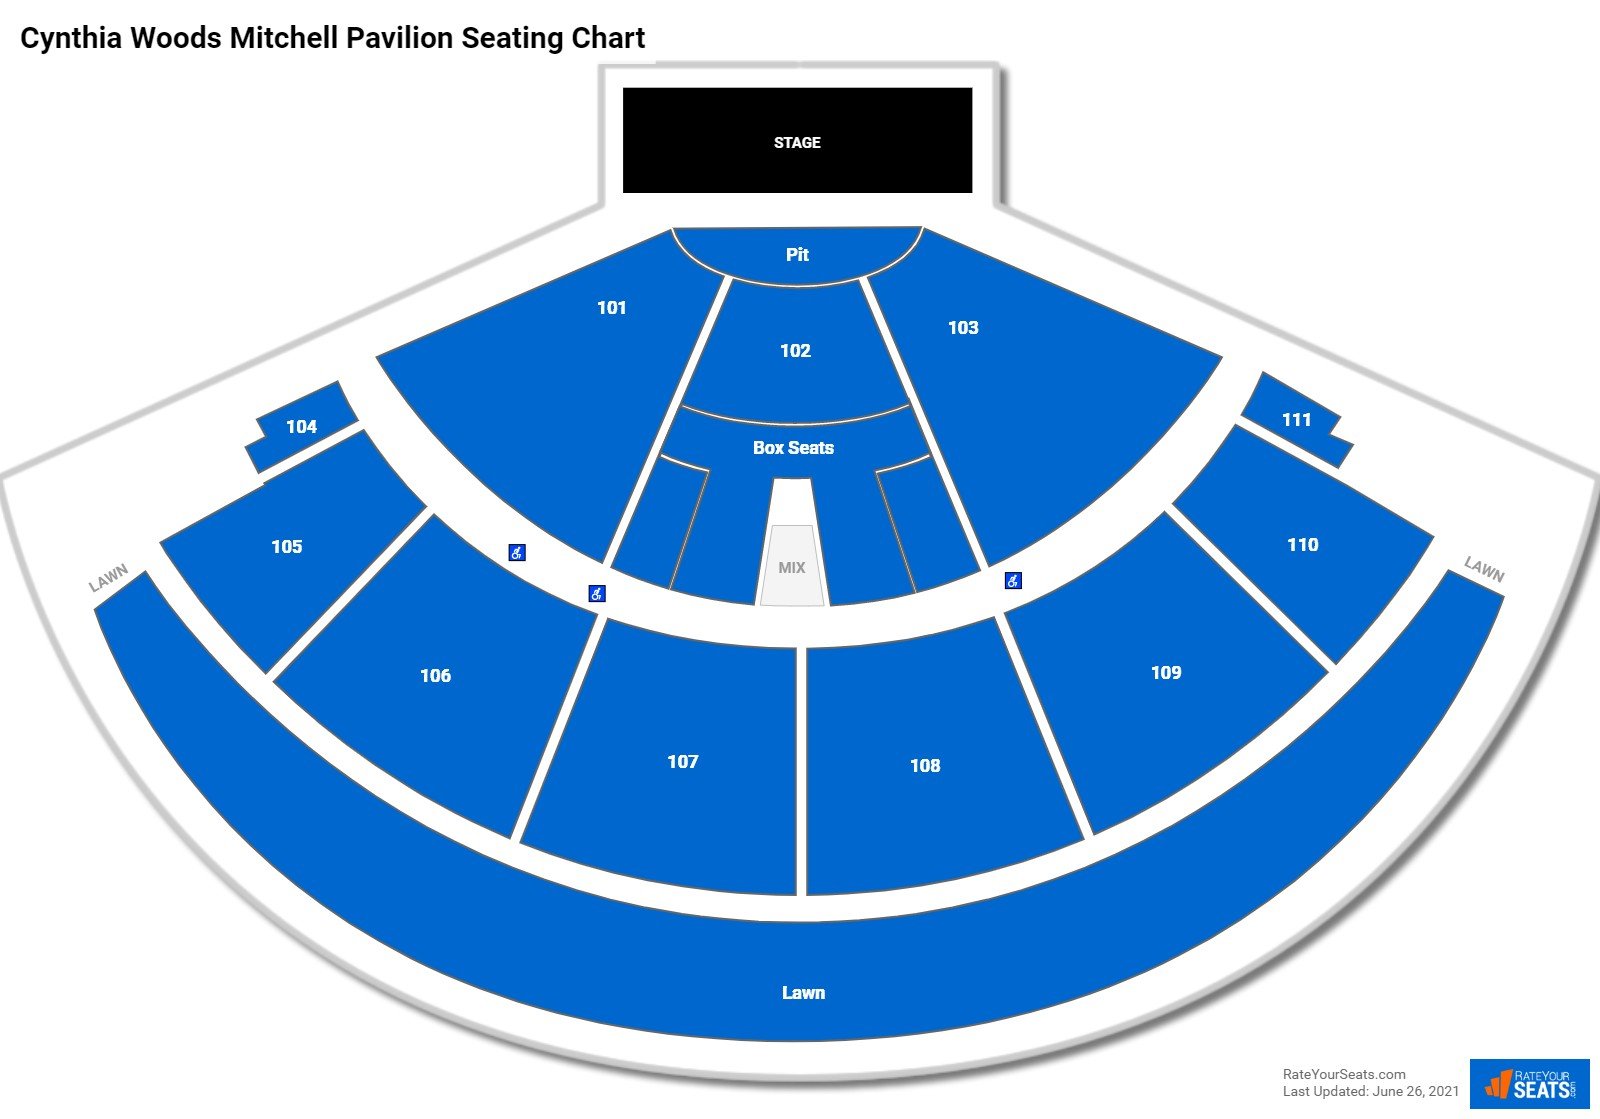 Cynthia Woods Mitchell Pavilion Concert Seating Chart